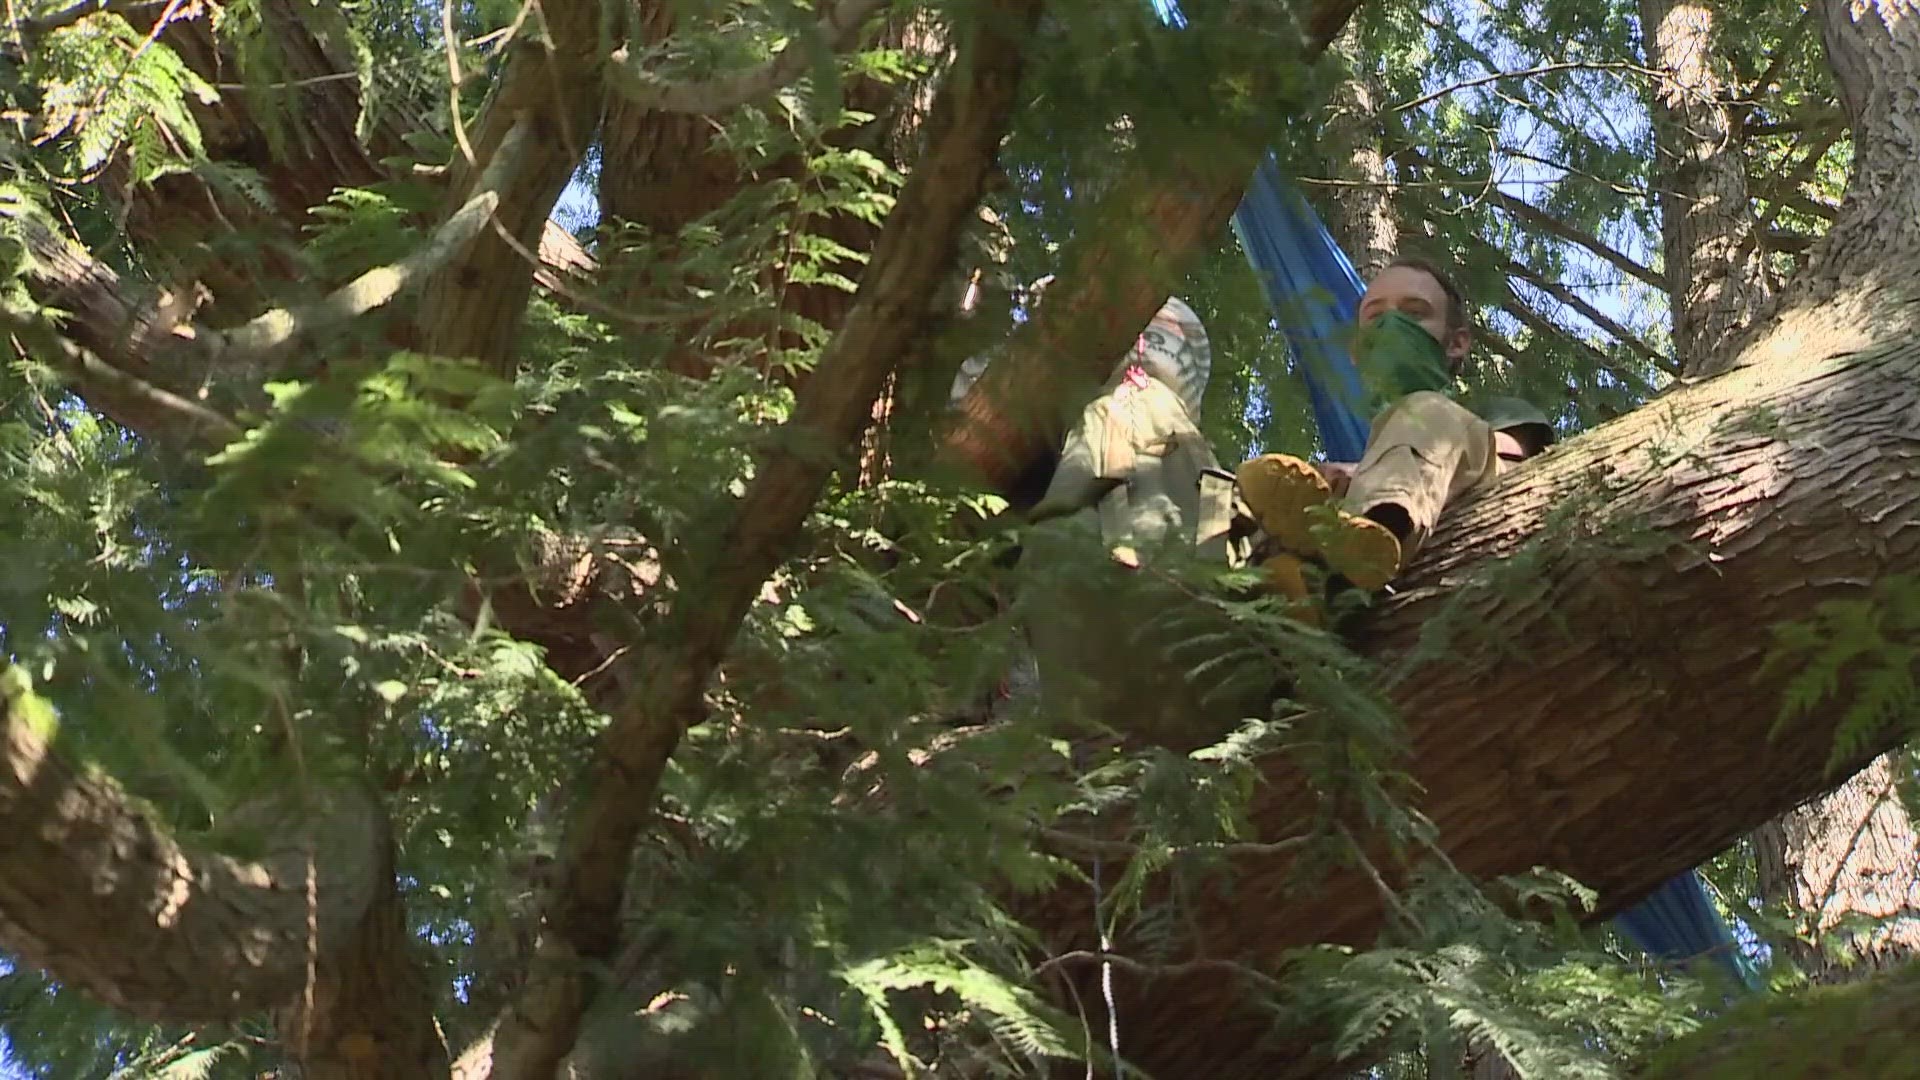 Environmental activist goes to new heights to save 80-foot tree in